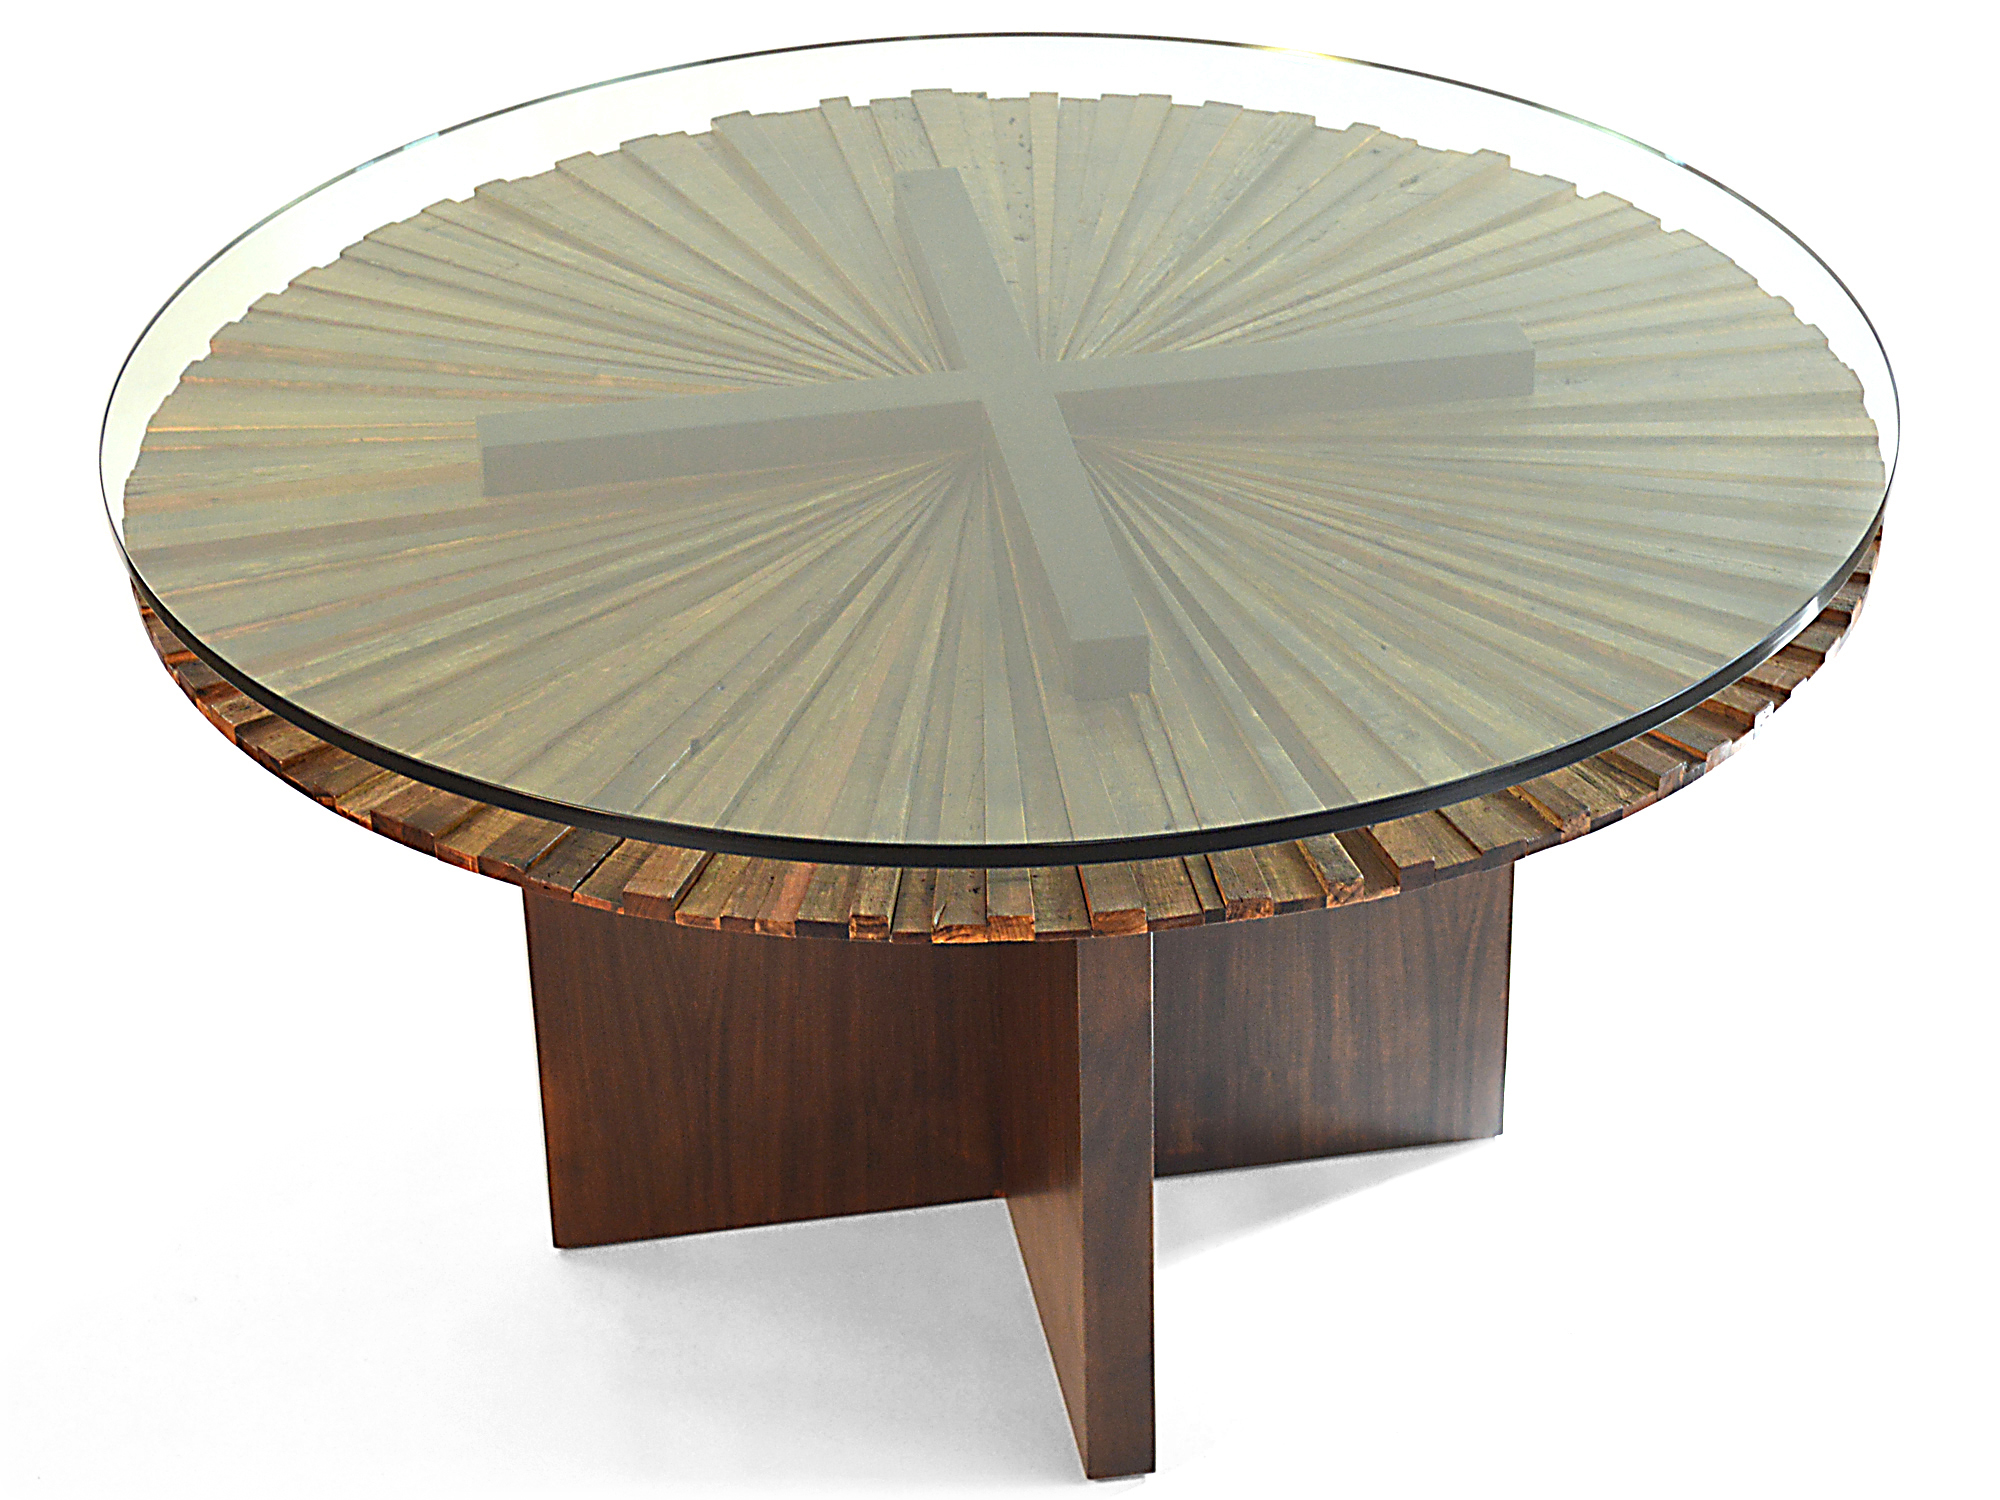 Rotsen-Furniture-Round Mandala Dining Table - Stained Wood Base by Rotsen Furniture 07